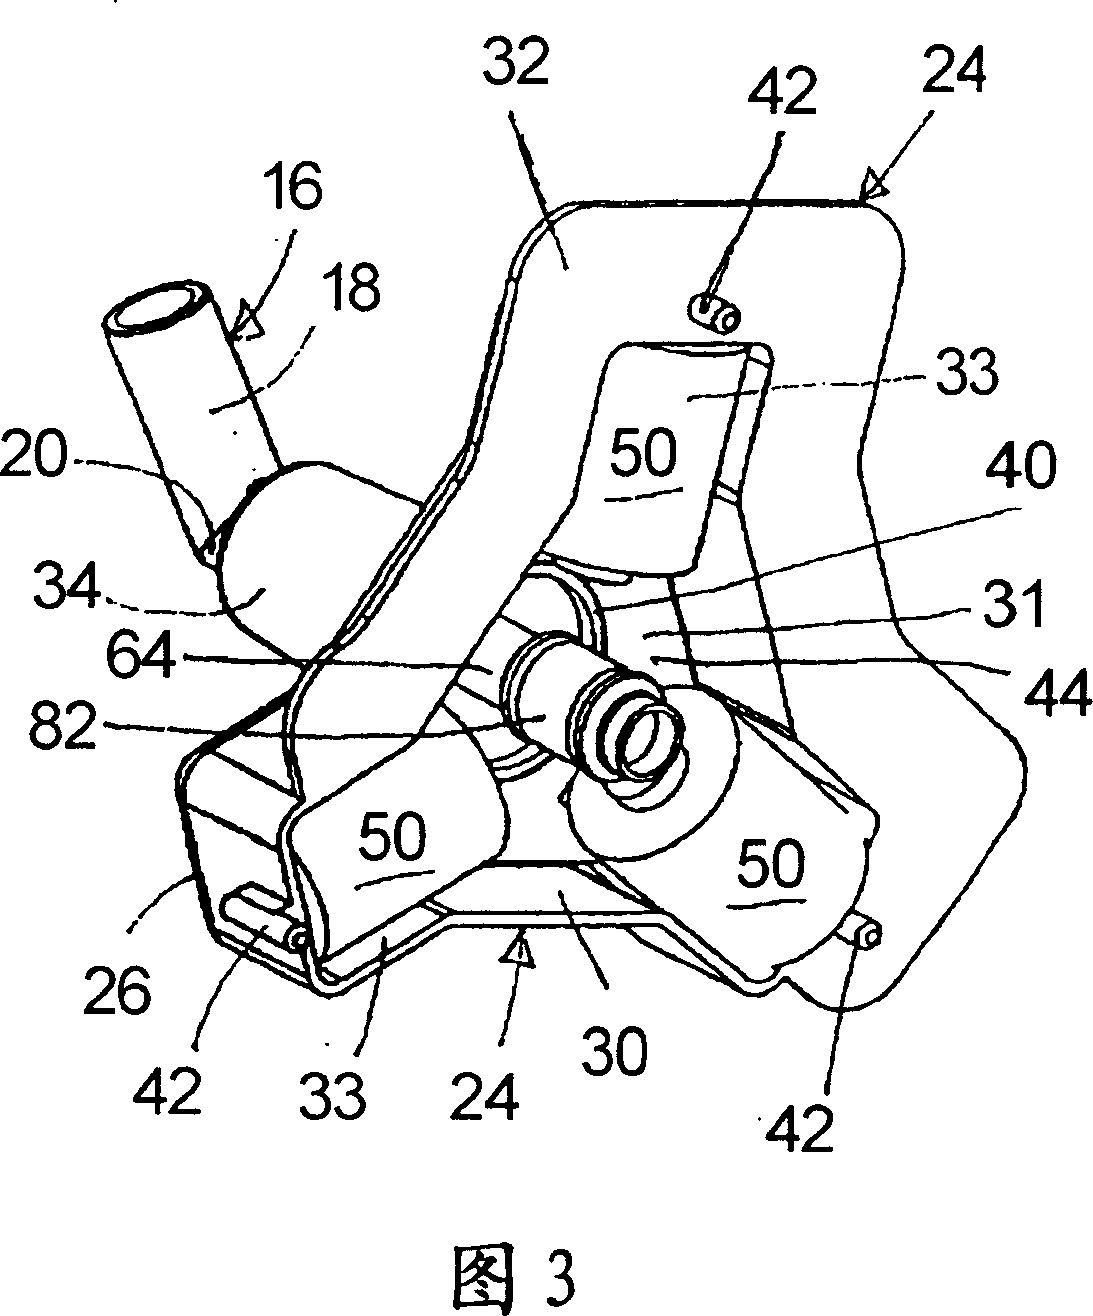 Apparatus and method for stirring and mixing of beverages